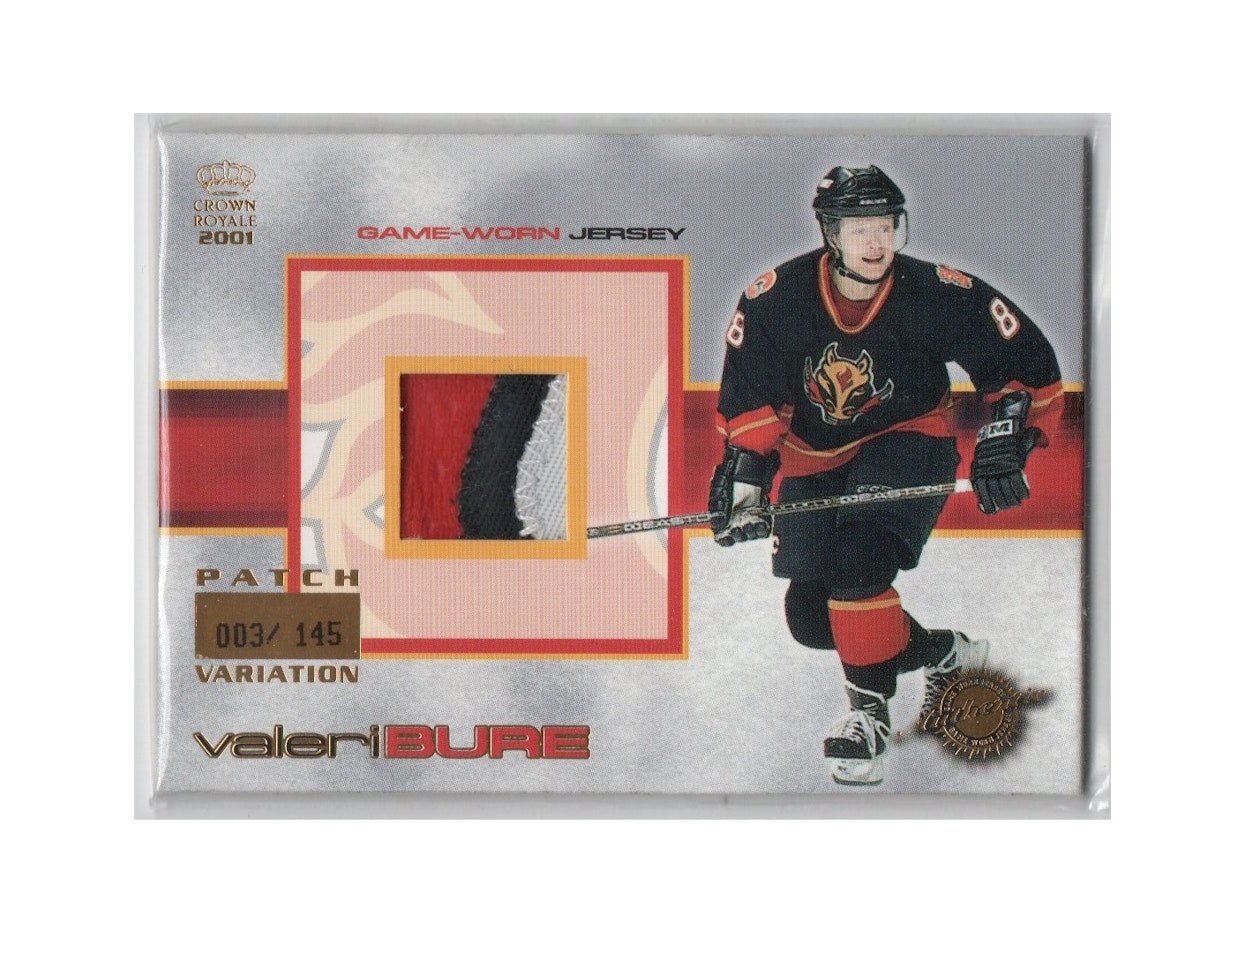 2000-01 Crown Royale Game-Worn Jersey Patches #2 Valeri Bure (80-X234-GAMEUSED-SERIAL-FLAMES)